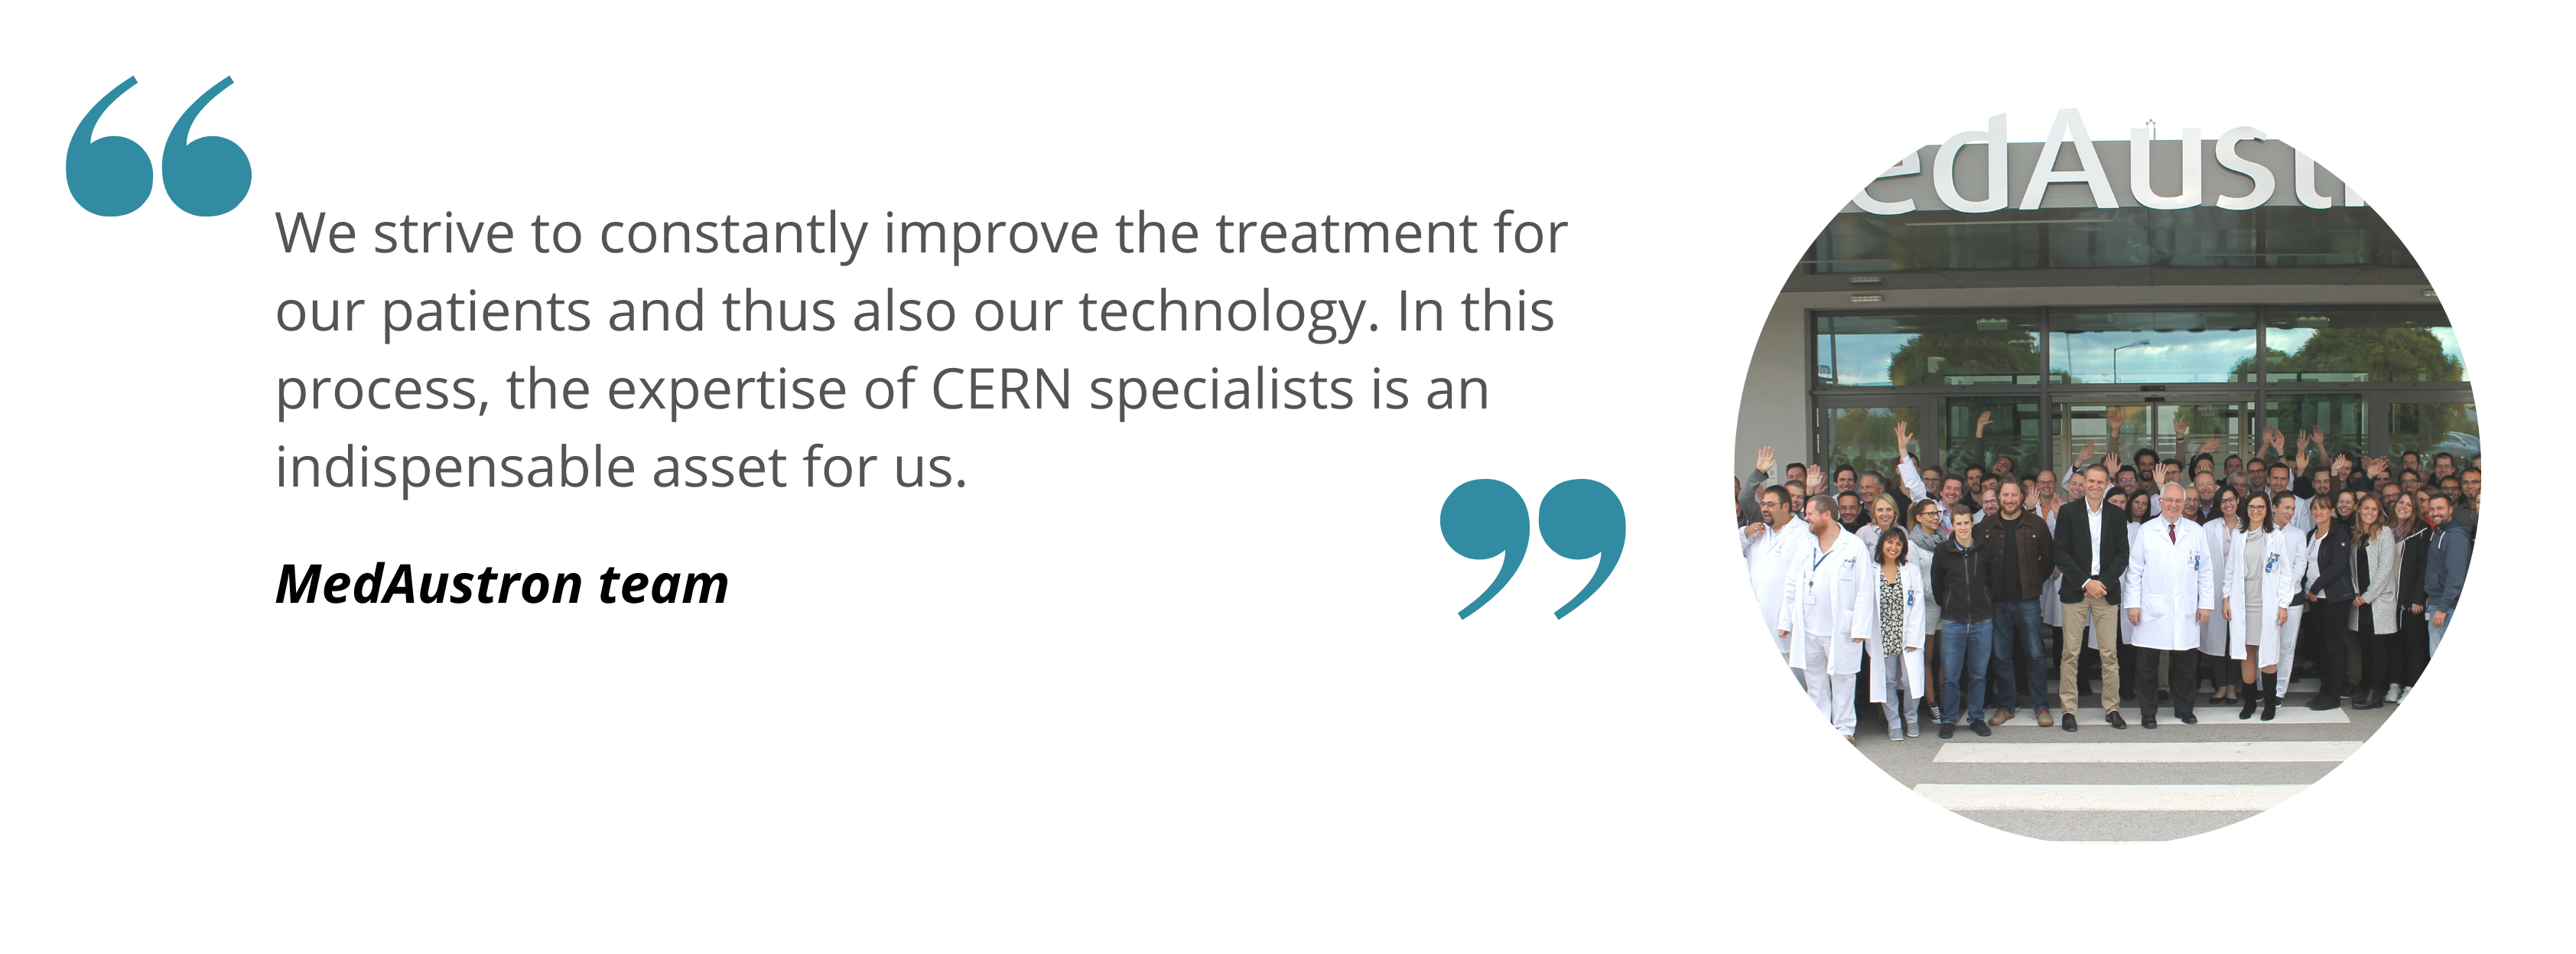 Medaustron - We strive to constantly improve the treatment for our patients and thus also our technology. In this process, the expertise of CERN specialists is an indispensable asset for us. 